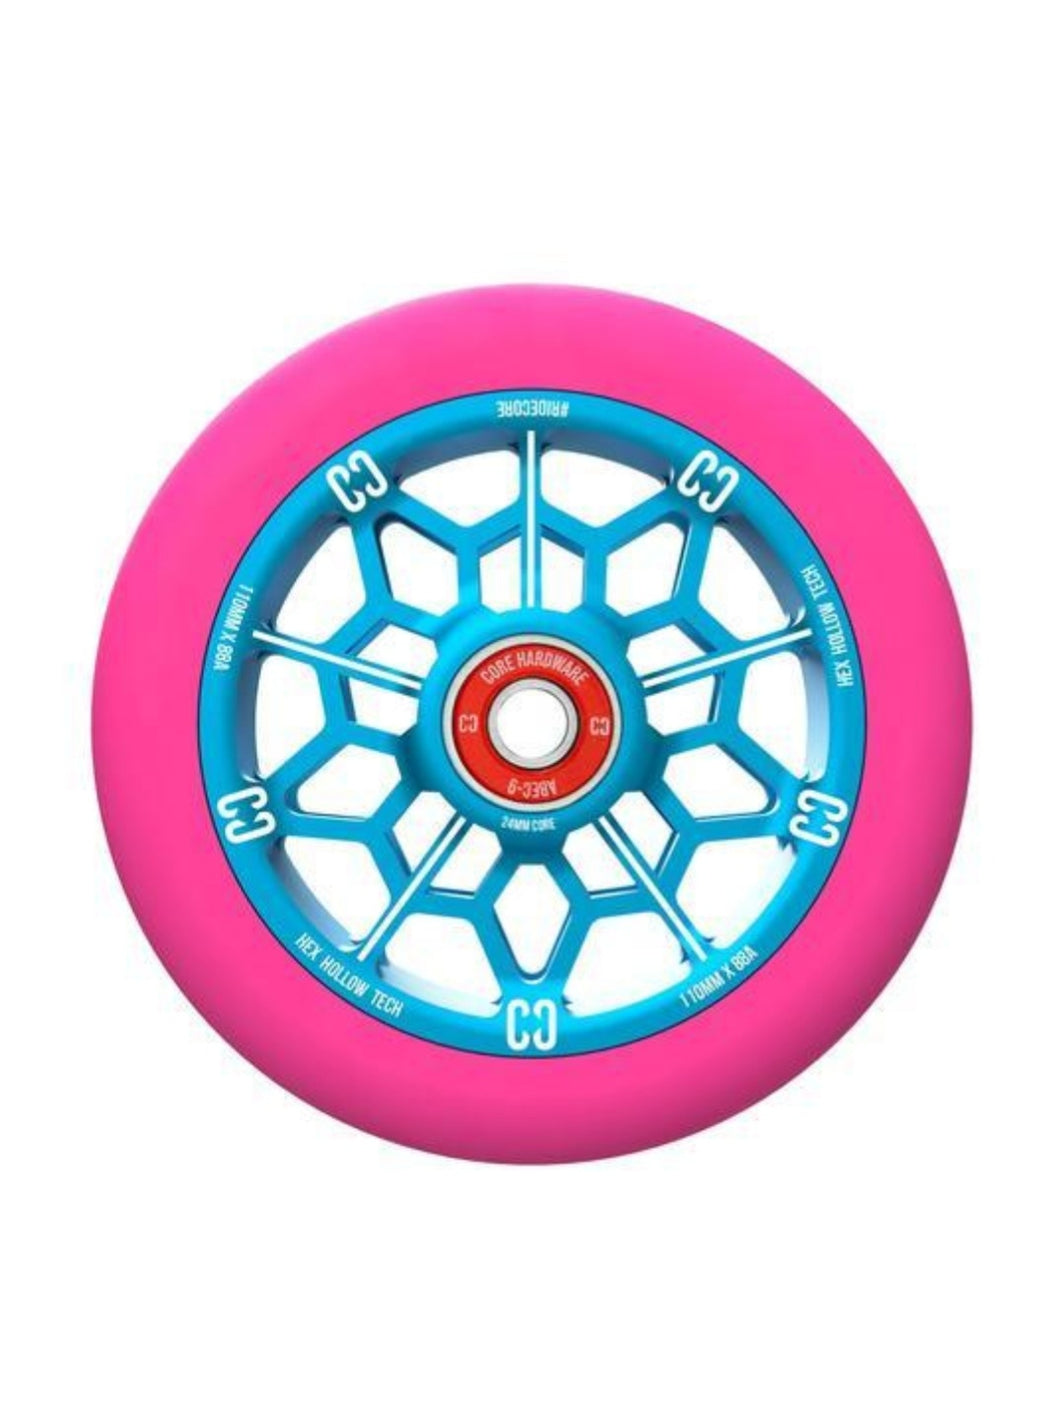 CORE HEX HOLLOW STUNT SCOOTER WHEEL 110MM – PINK/BLUE